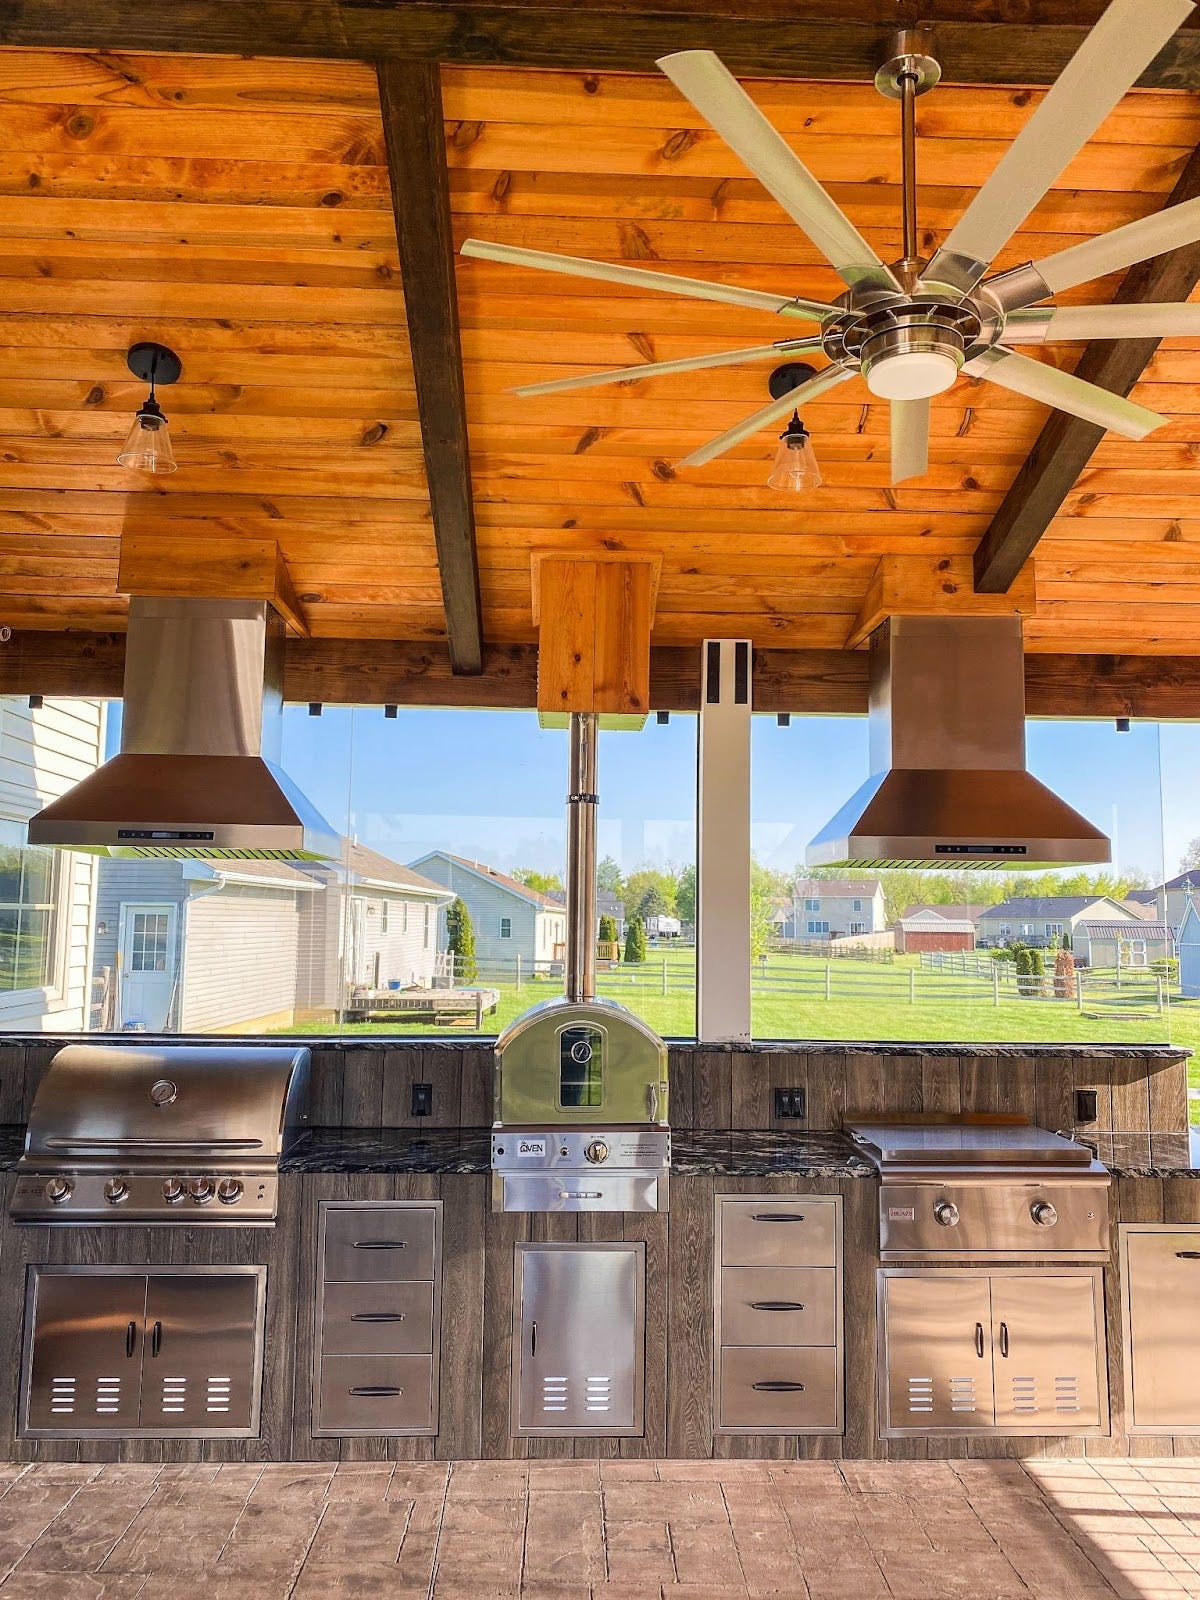 Stylish outdoor culinary setup with wood-paneled ceiling, featuring premium grilling equipment, ventilation hoods, and a view of a residential neighborhood. - Proline Range Hoods - prolinerangehoods.com 